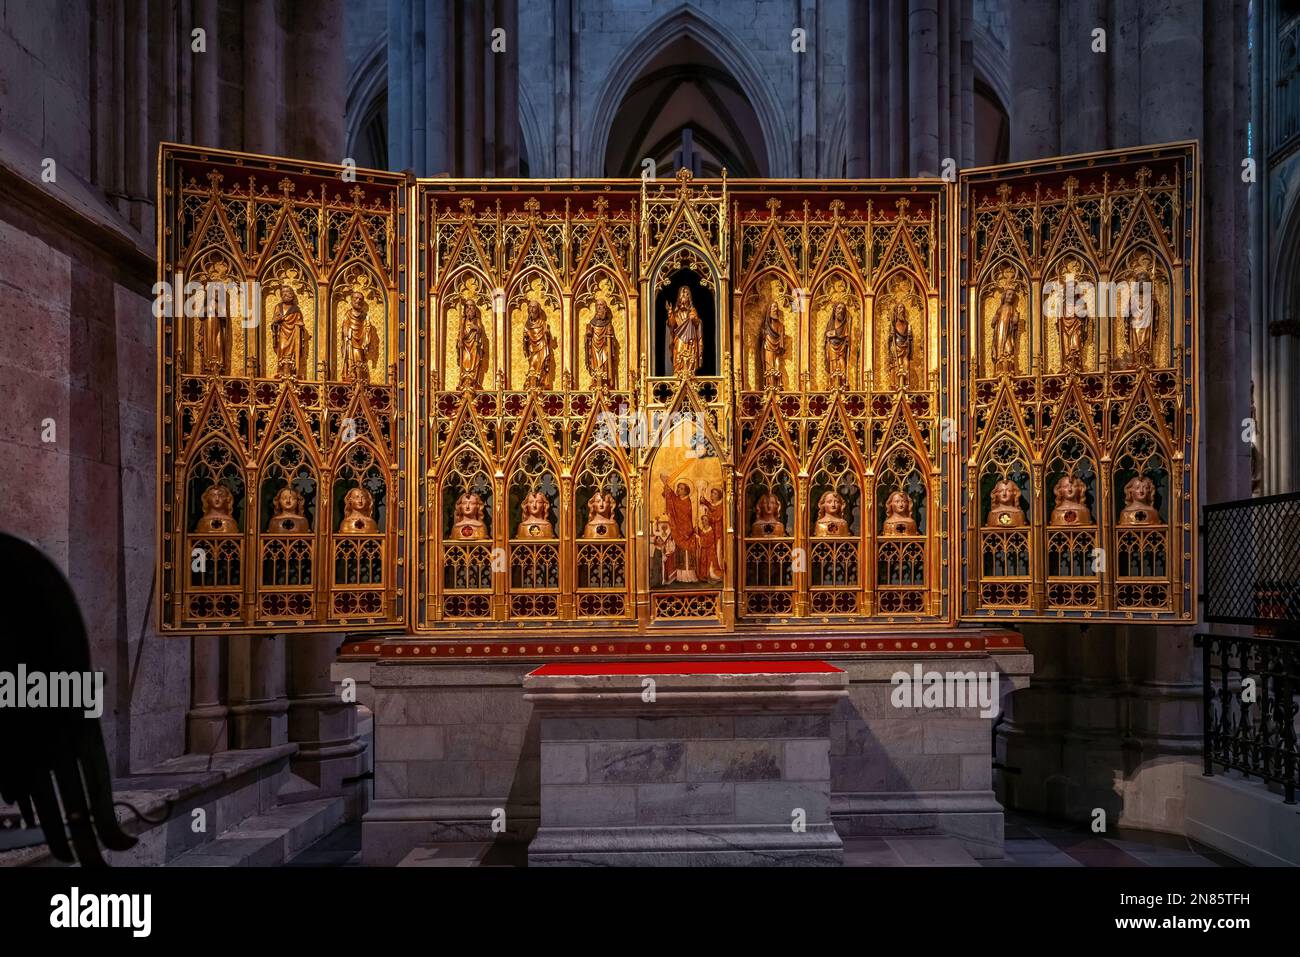 Altar of Poor Clares at Cologne Cathedral Interior - Cologne, Germany Stock Photo